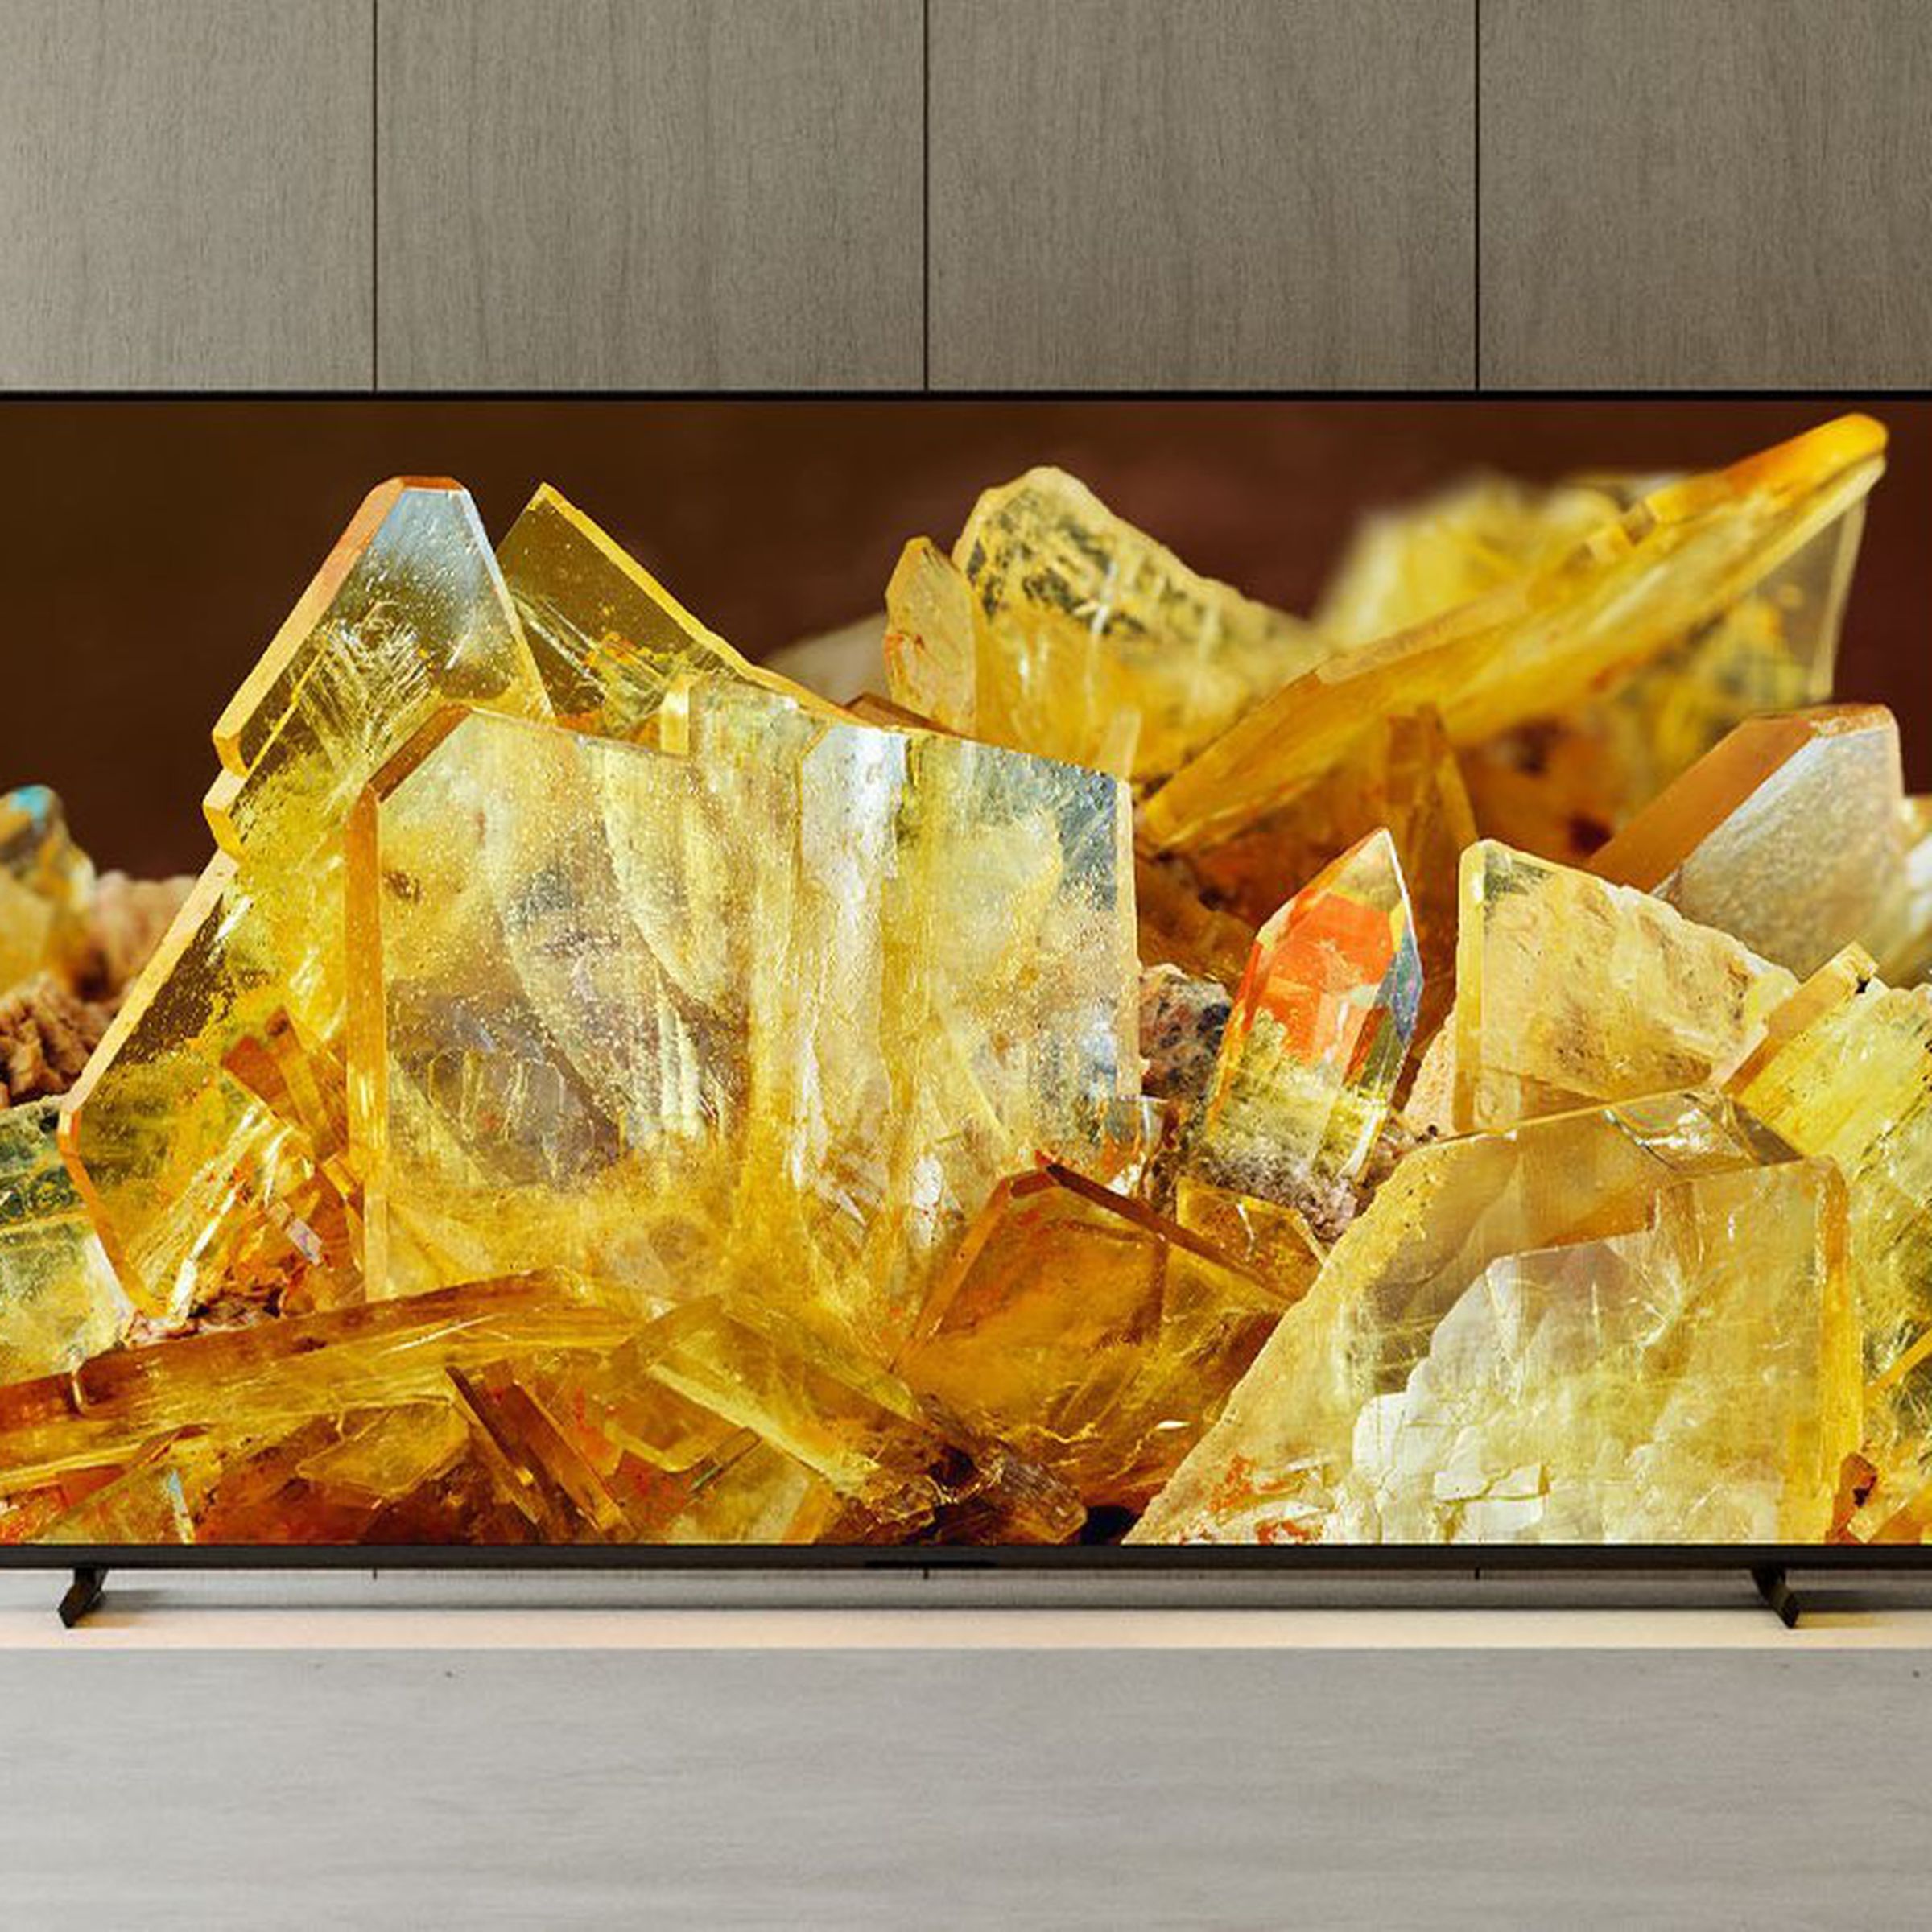 Sony X90L TV sitting on stand